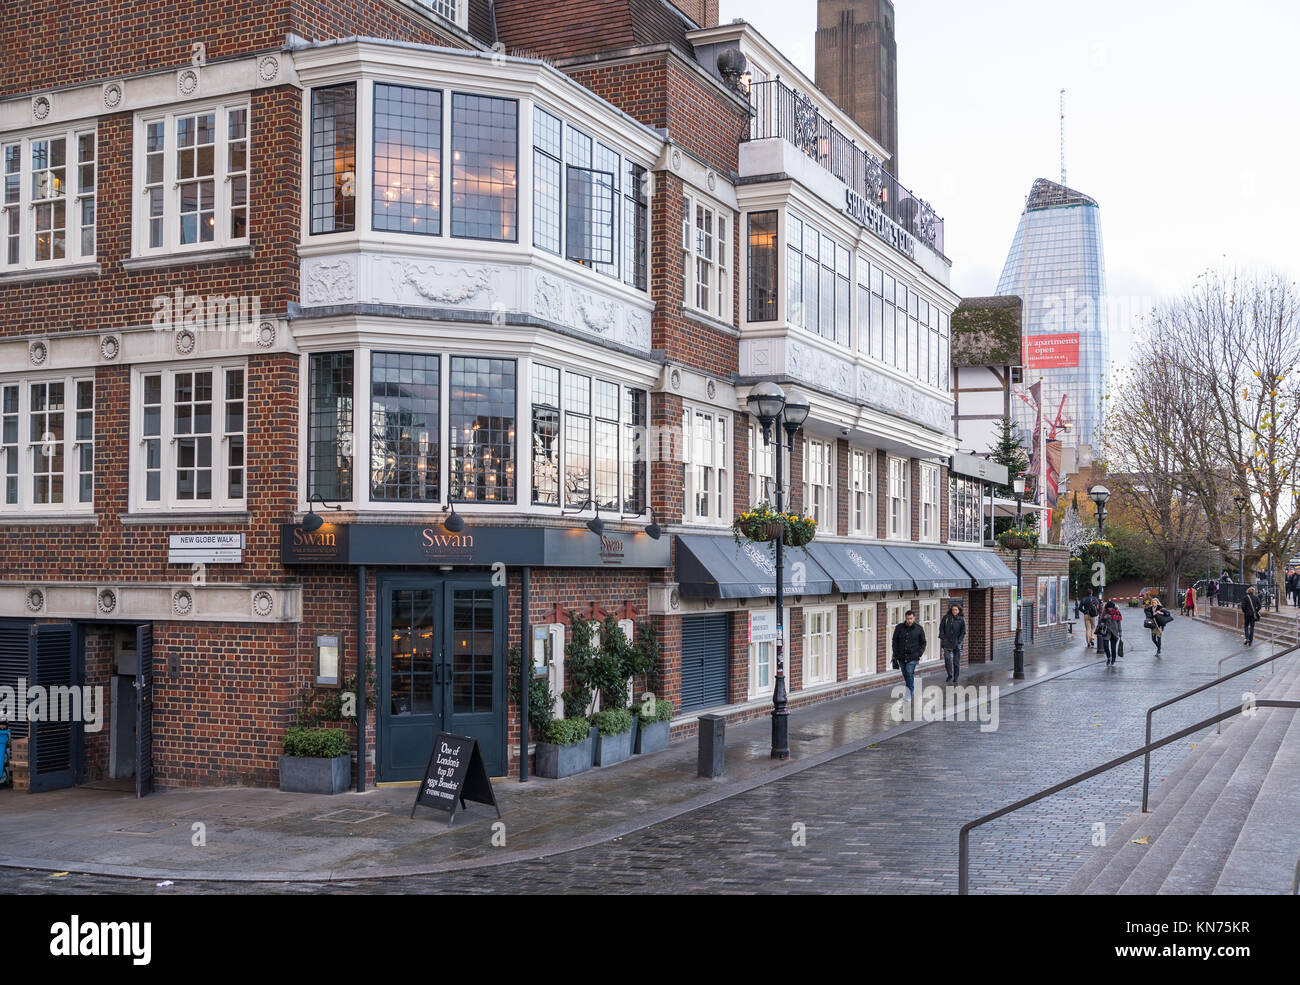 The Swan bar and restaurant, situated next to Shakespeare's Globe Theatre  on the South Bank of the River Thames, London Borough of Southwark, England  Stock Photo - Alamy